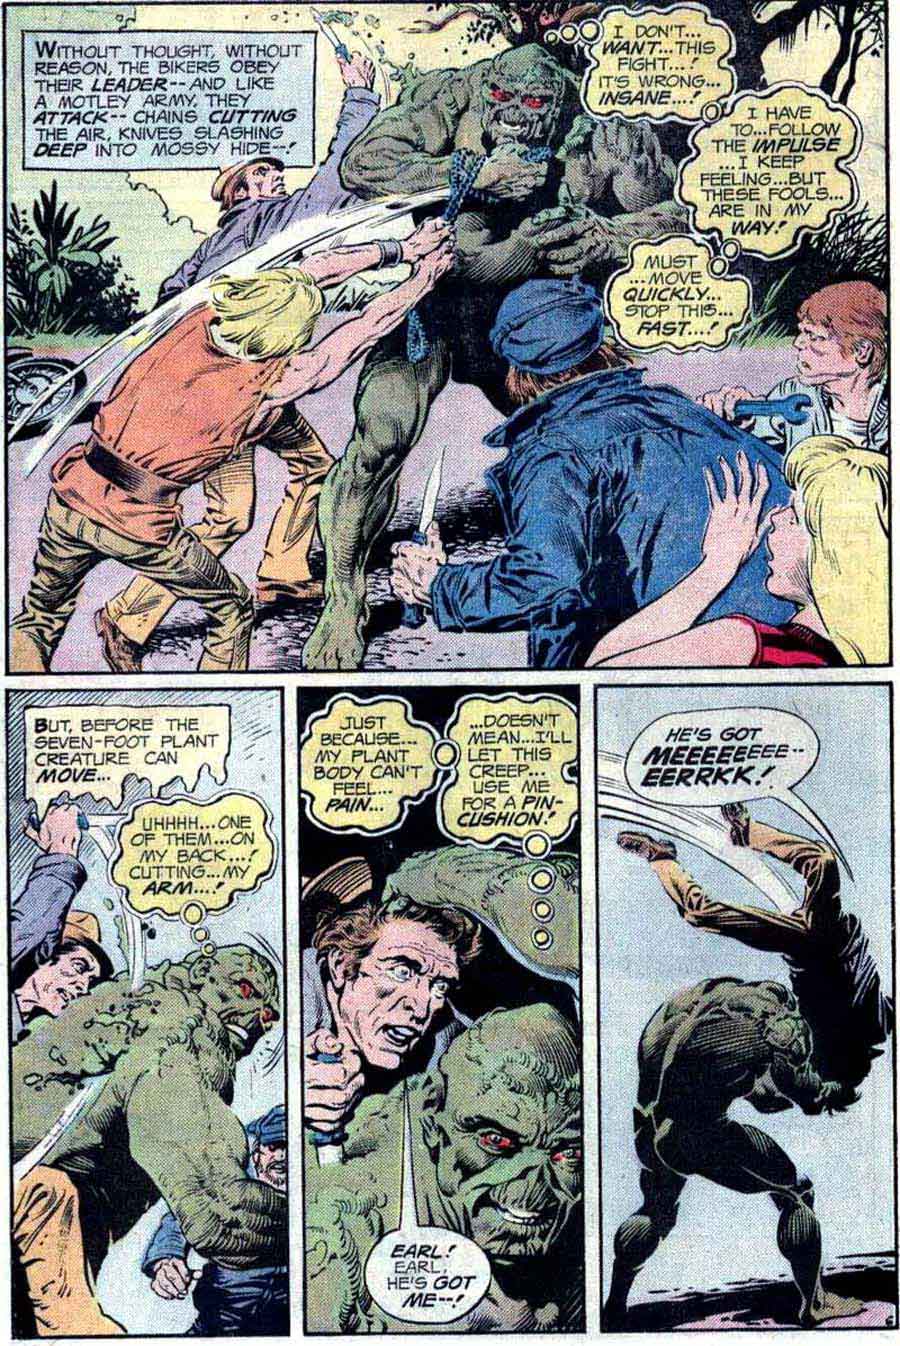 Swamp Thing v1 #20 1970s bronze age dc comic book page art by Nestor Redondo